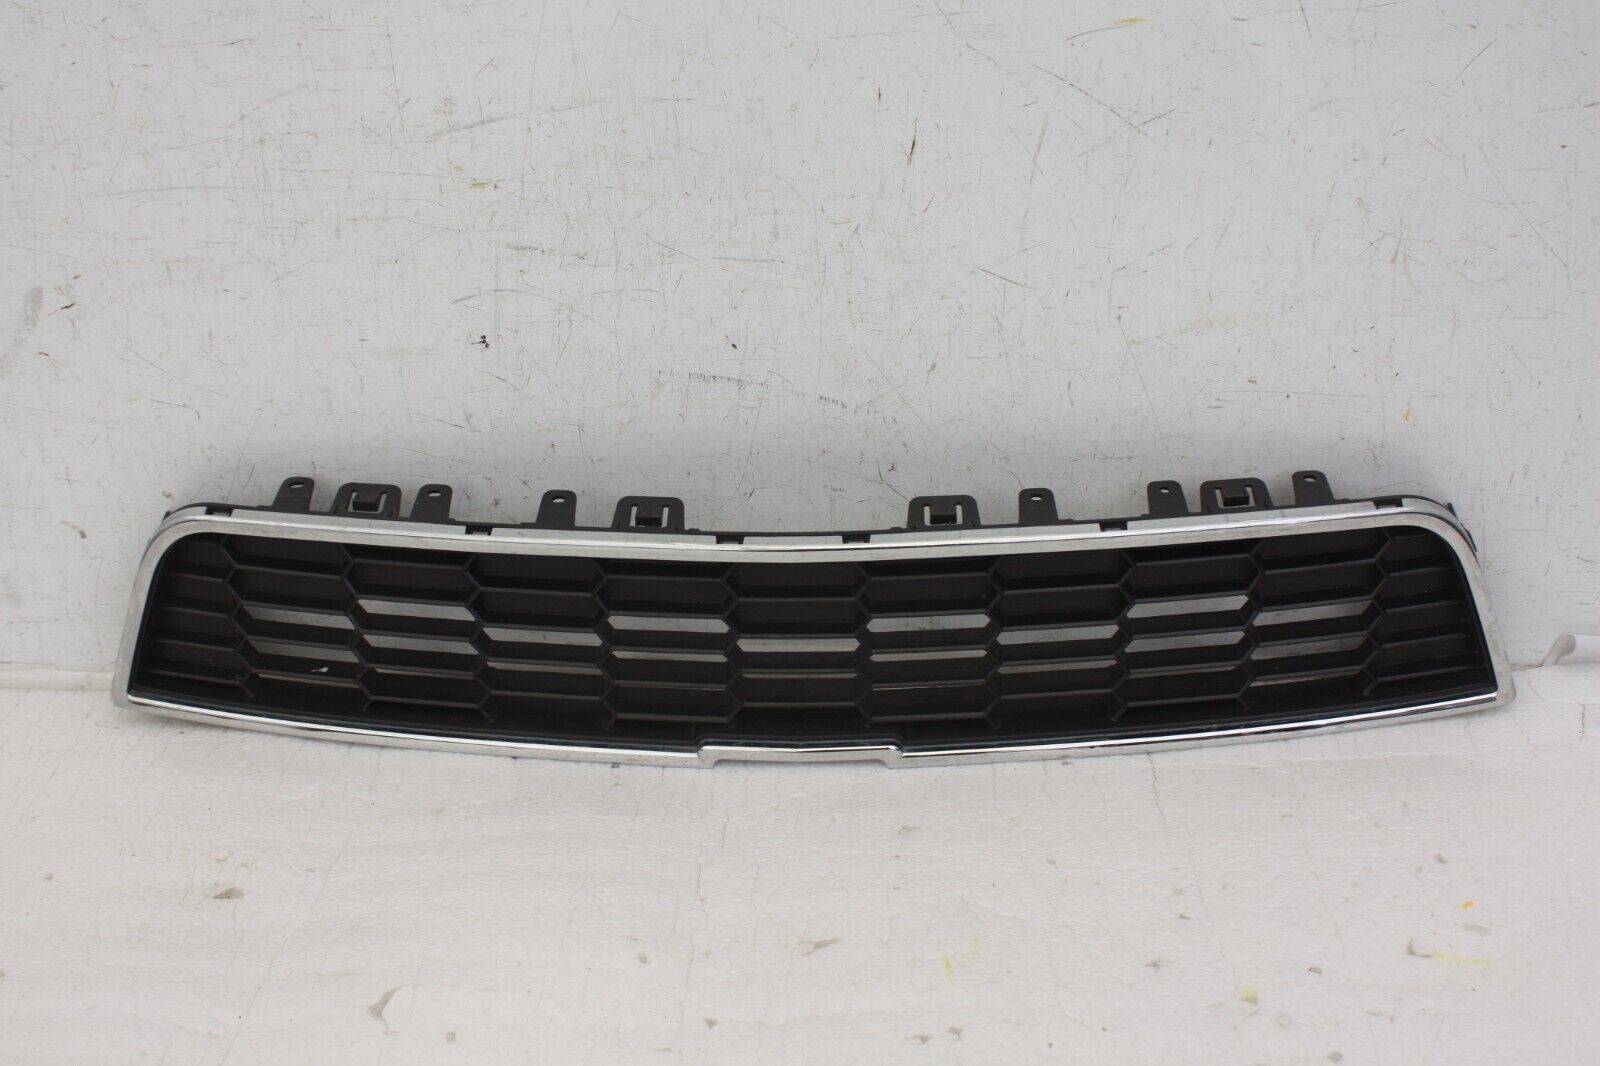 Chevrolet-Aveo-Front-Bumper-Lower-Grill-2011-TO-2015-96694760-Genuine-176438479038